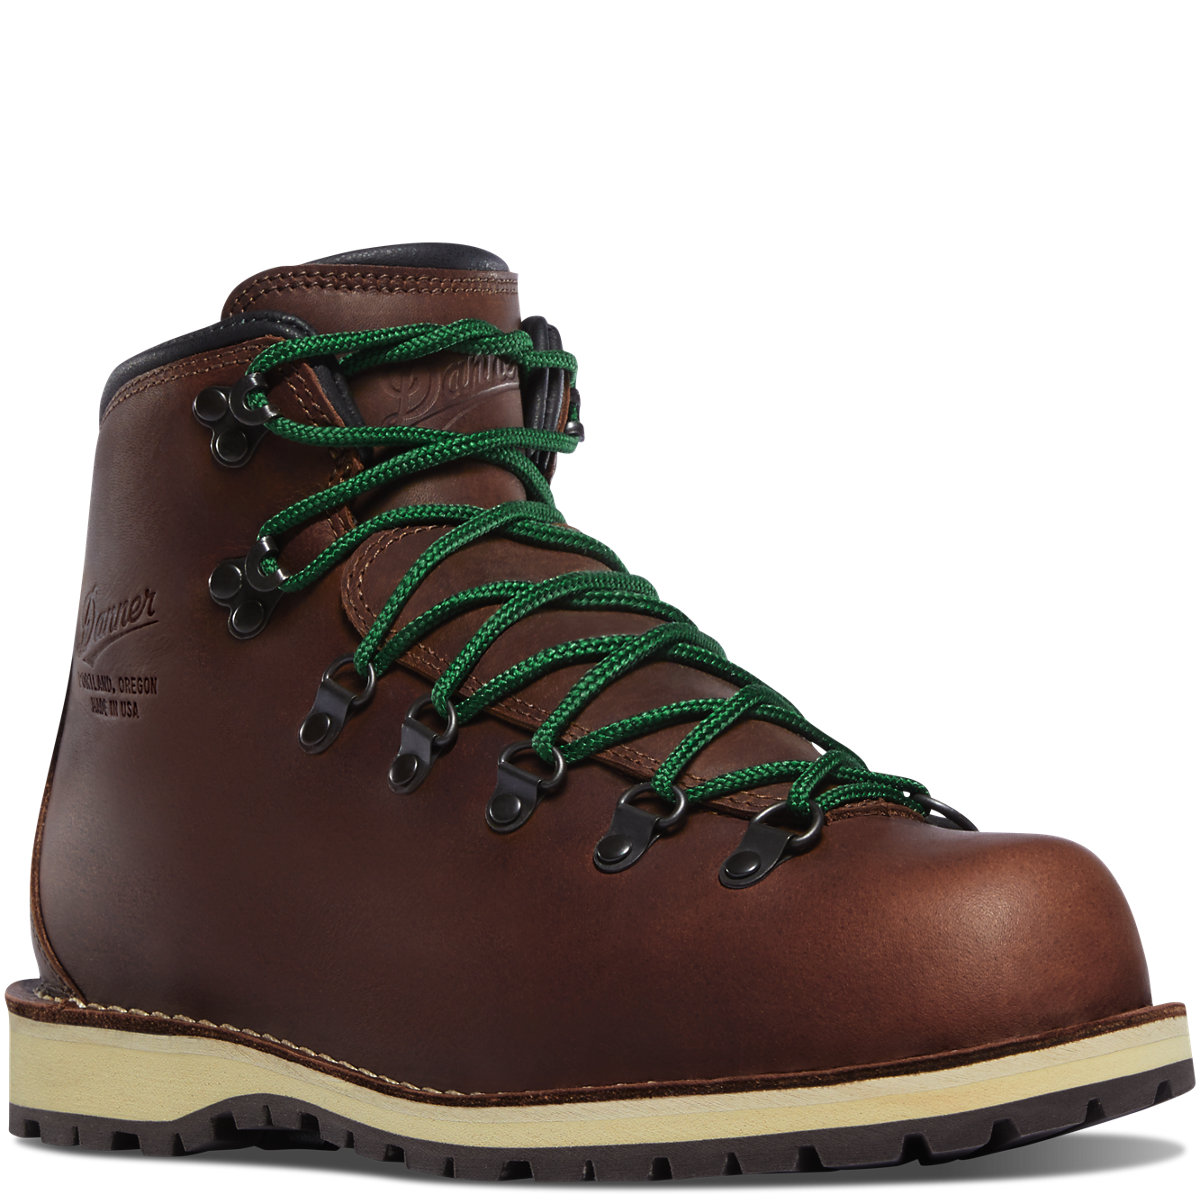 USA-Made Hiking Boots - Danner